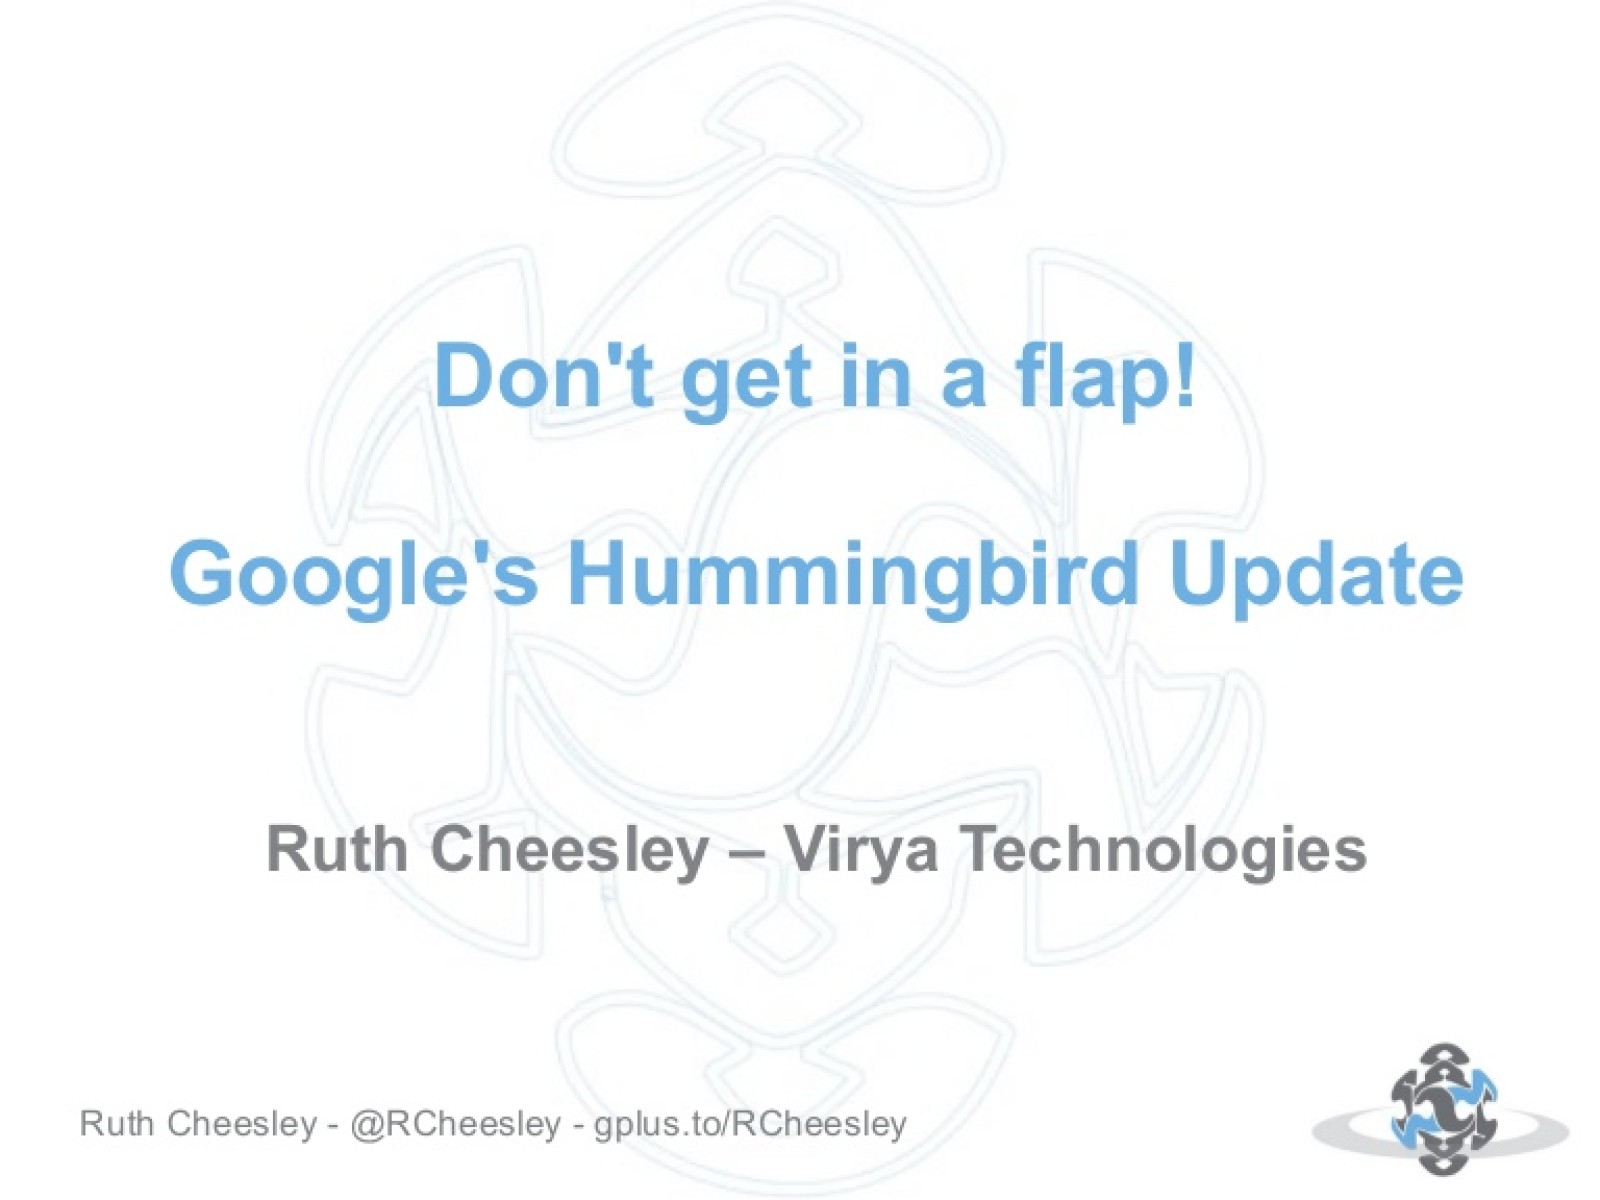 Don’t get in a flap about the Google Hummingbird update